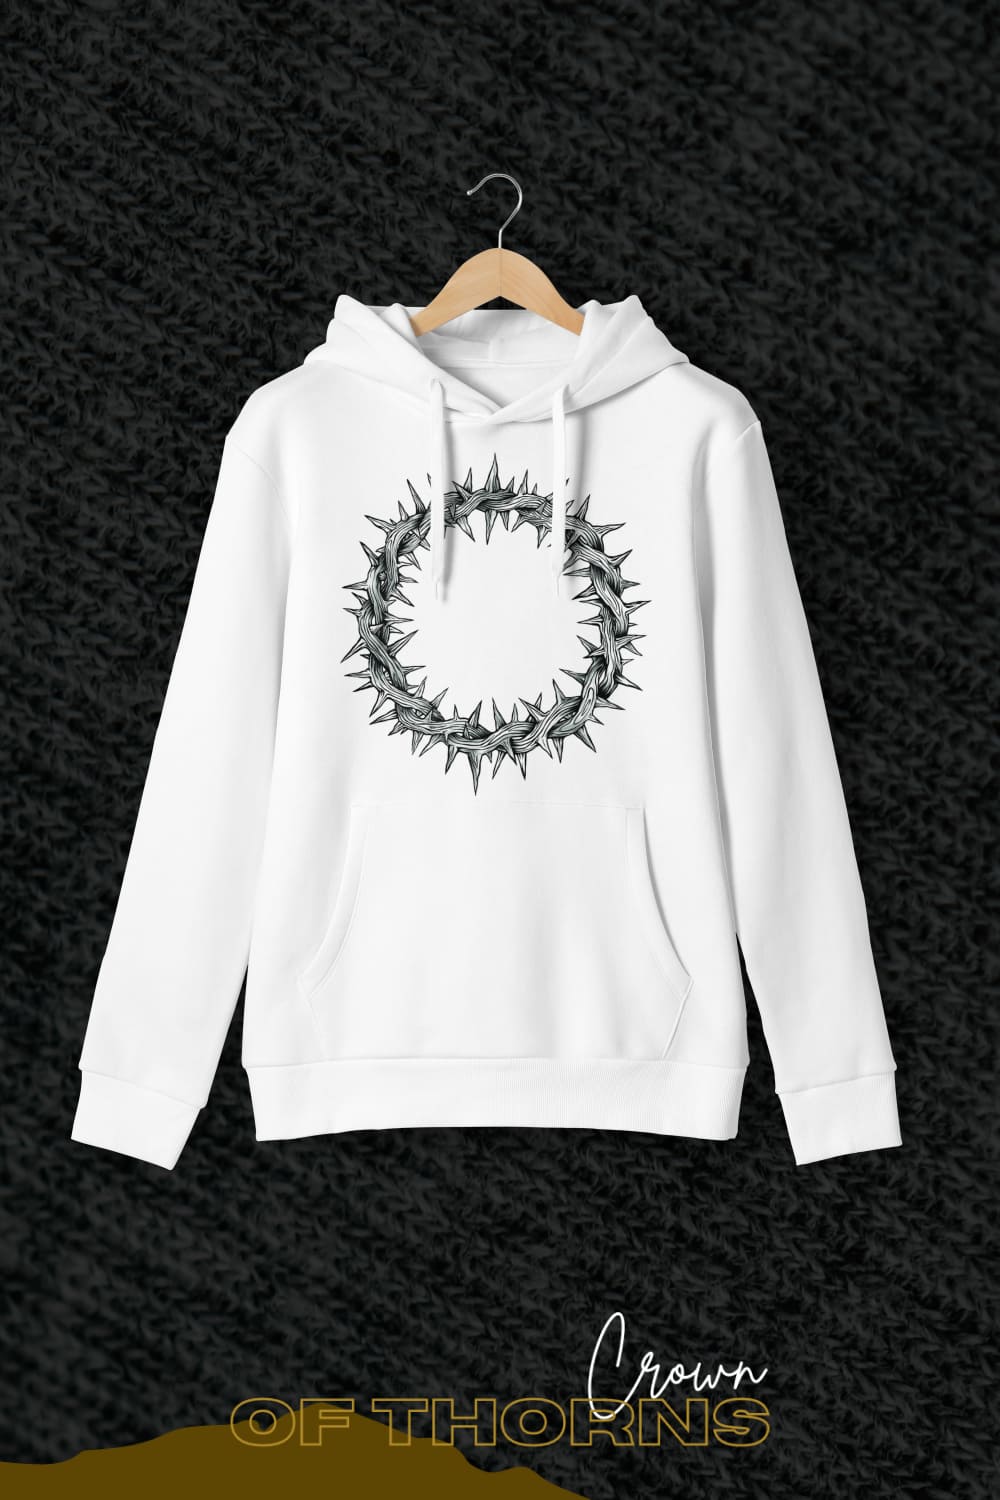 A crown of thorns is depicted on a white sweater.